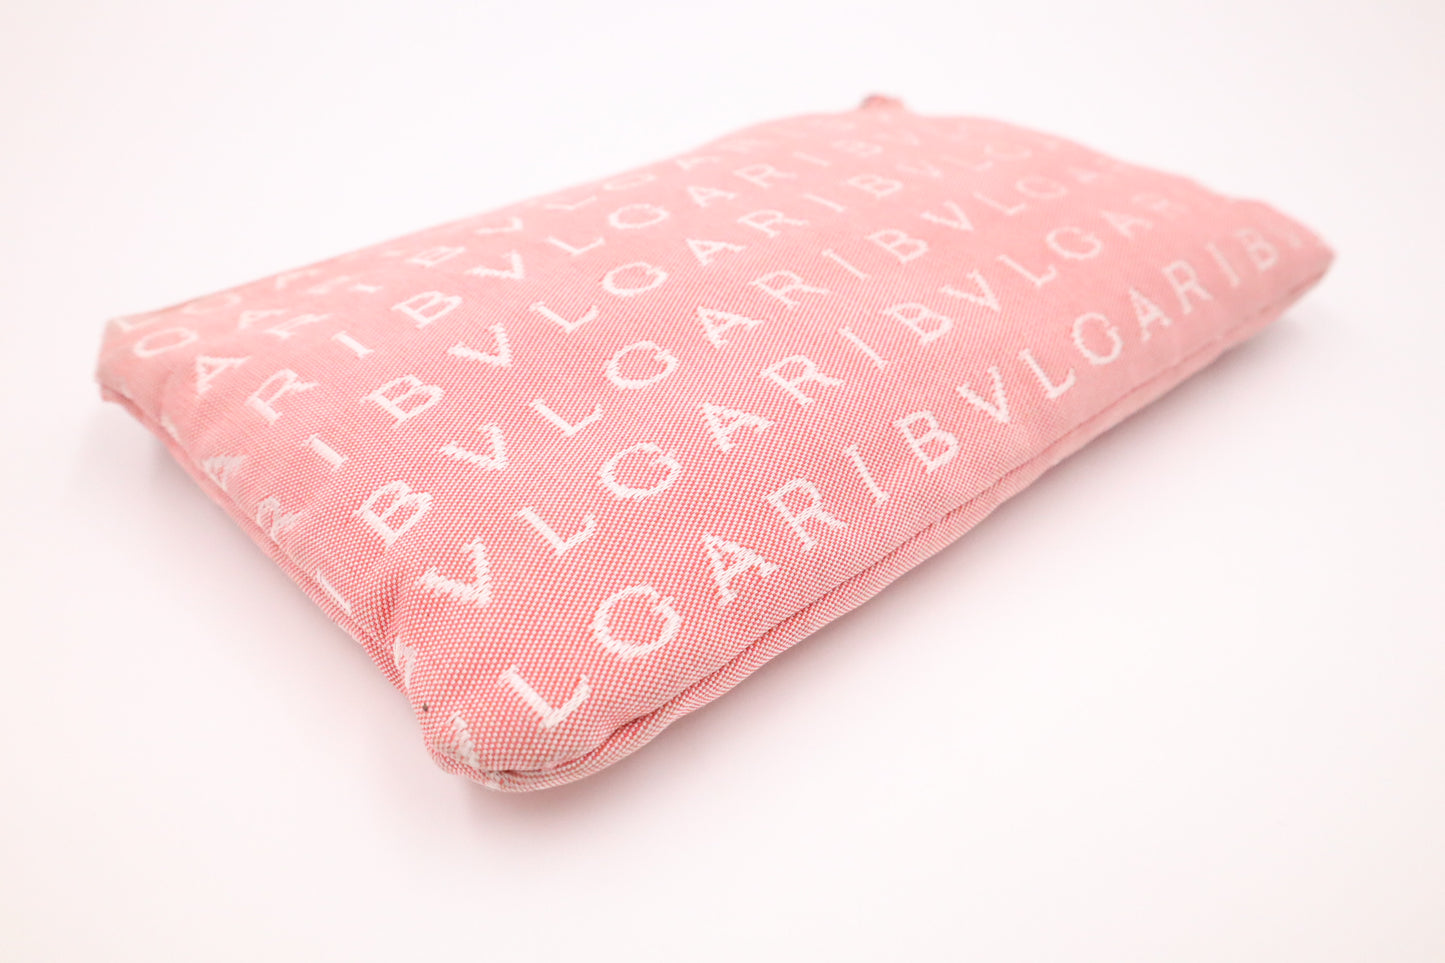 Bvlgari Tote in Pink Canvas